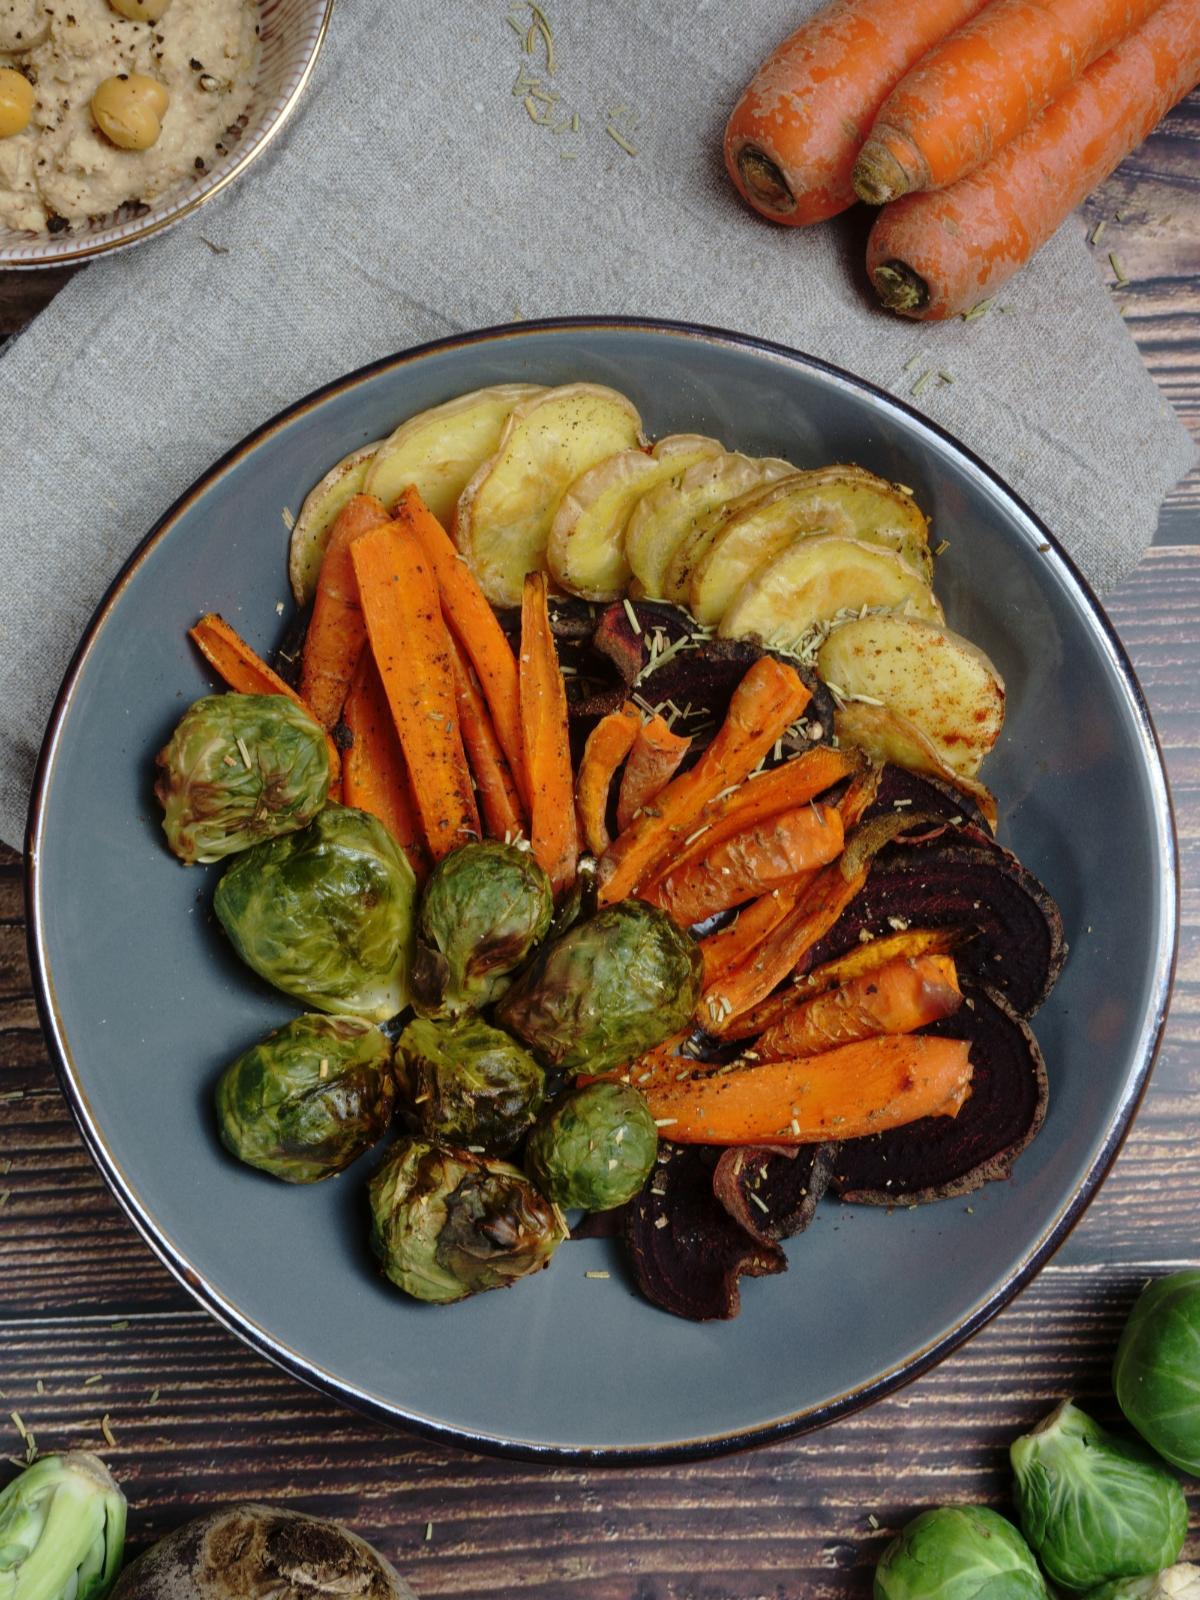 Oven Roasted Vegetables With Potatoes 3